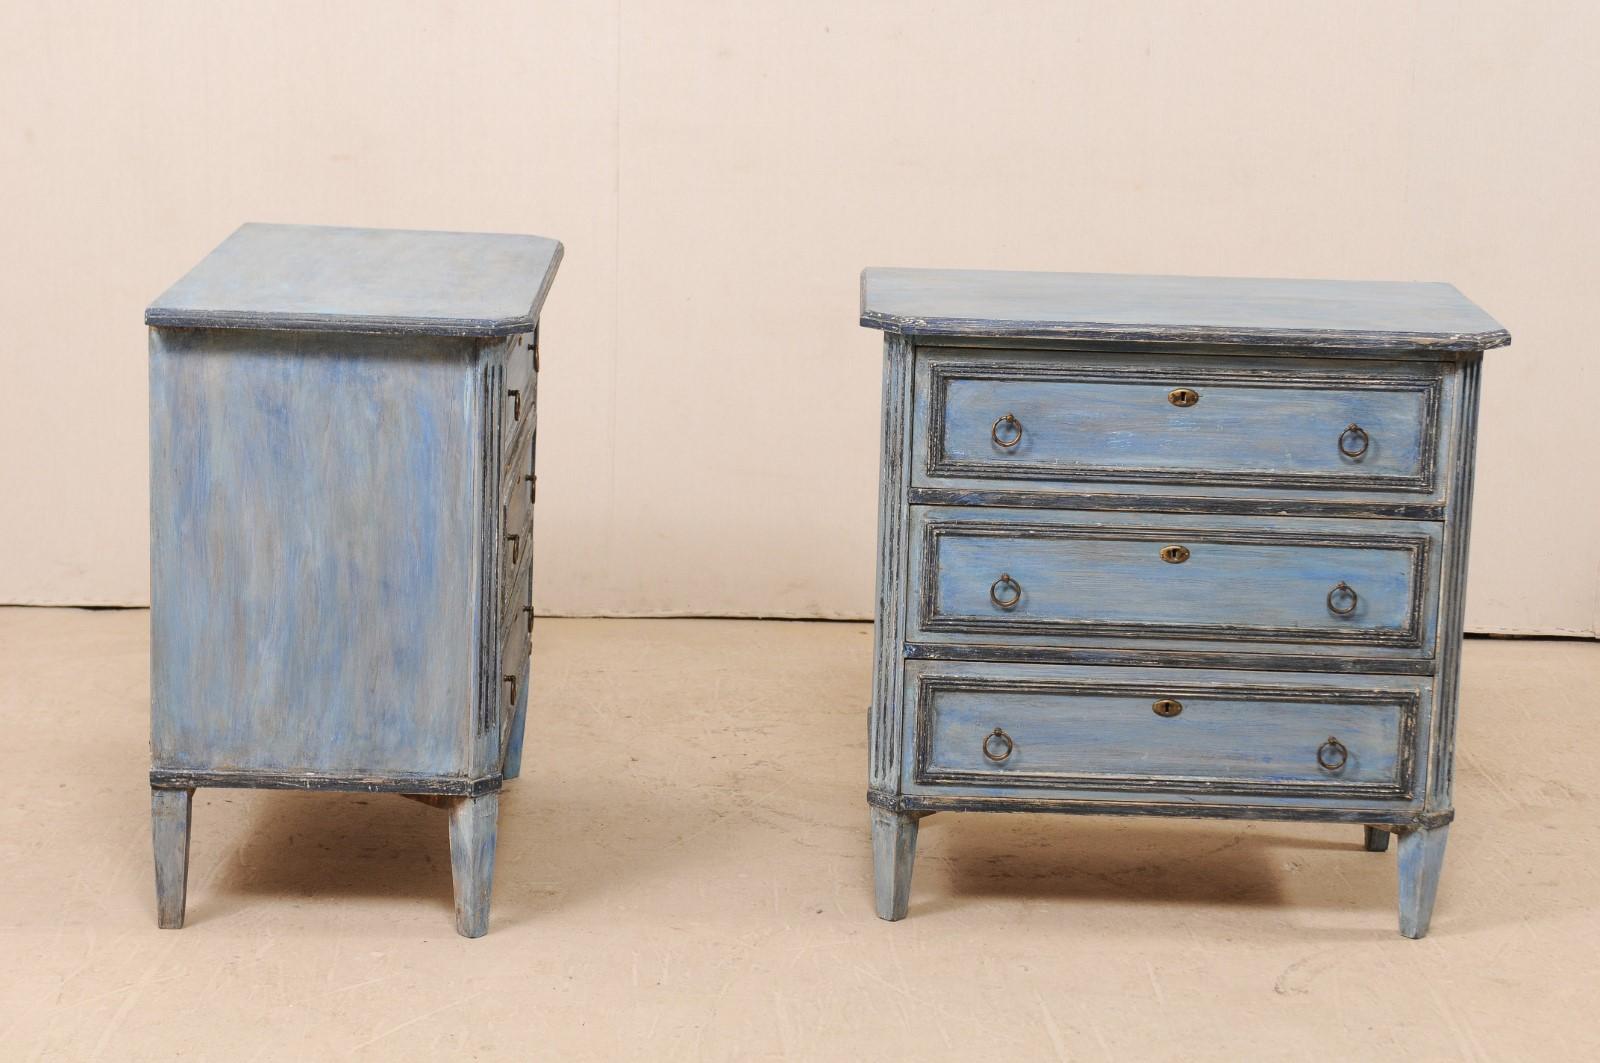 20th Century Pair of Swedish Midcentury Painted Wood Three-Drawer Chests in Soft Blue Finish